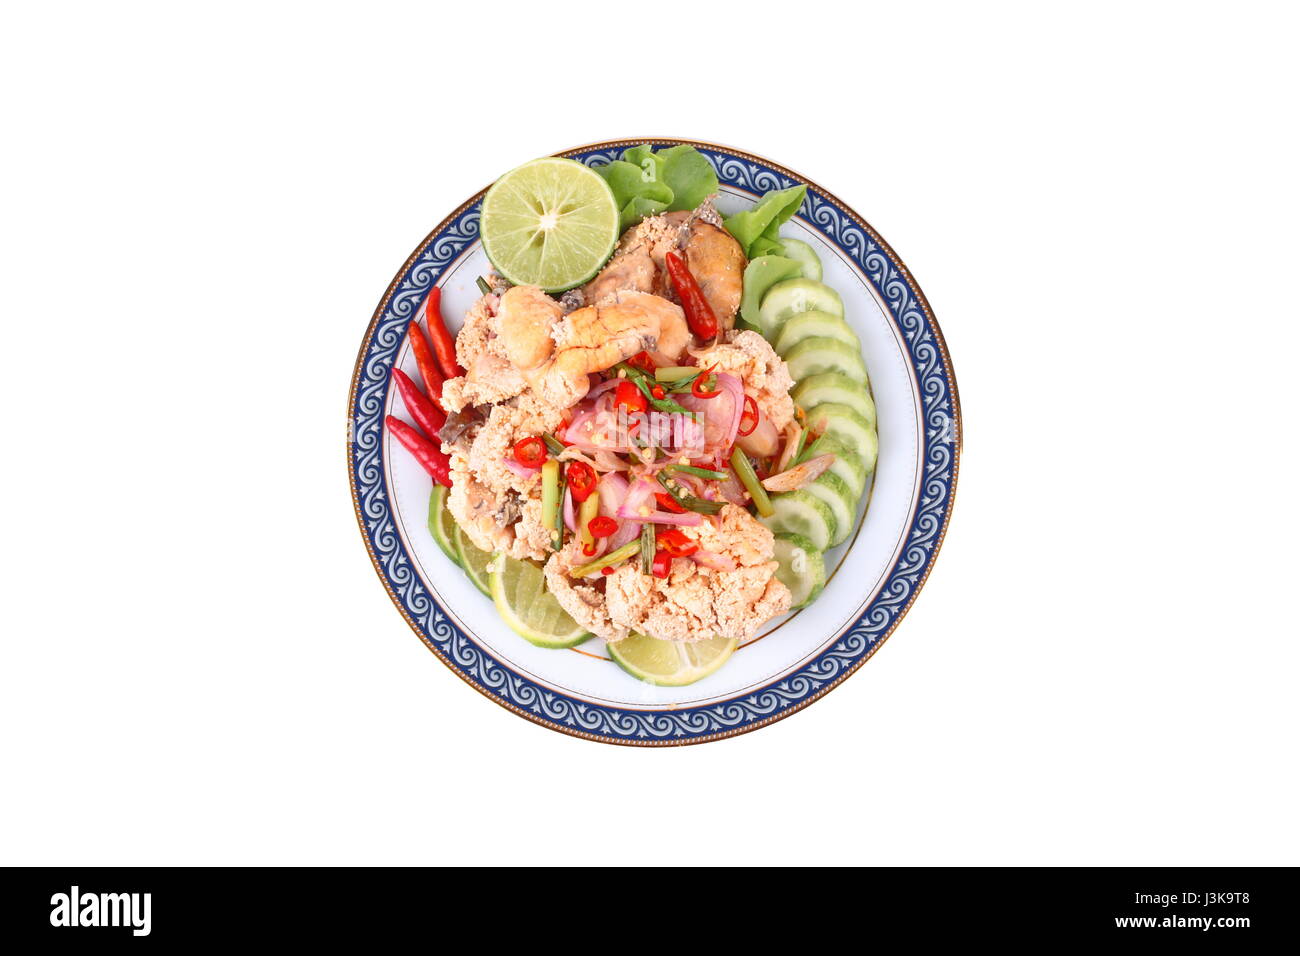 Thai recipe,Spicy sour carp eggs of silver barb fish salad topped red chili,green lemon,shallots,cucumber,red onion and lettuce ,call Yum Khai Pla Ta  Stock Photo